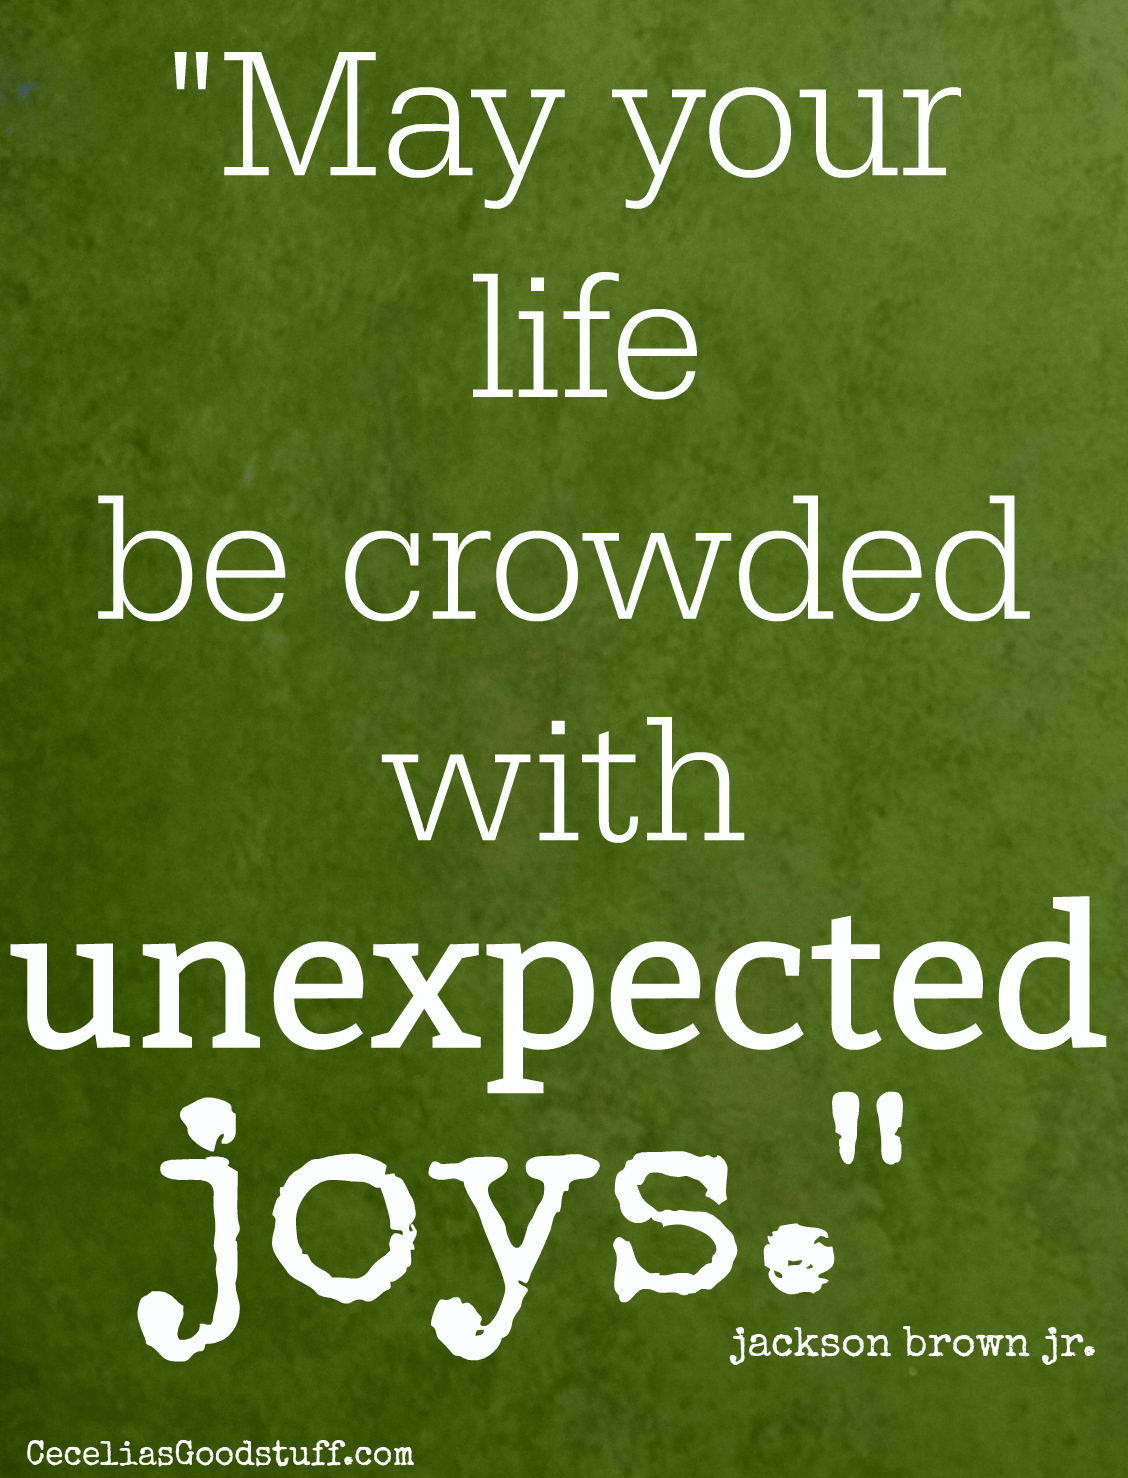 Inspiration for the day - Quote by Jackson Brown Jr. - unexpected joys